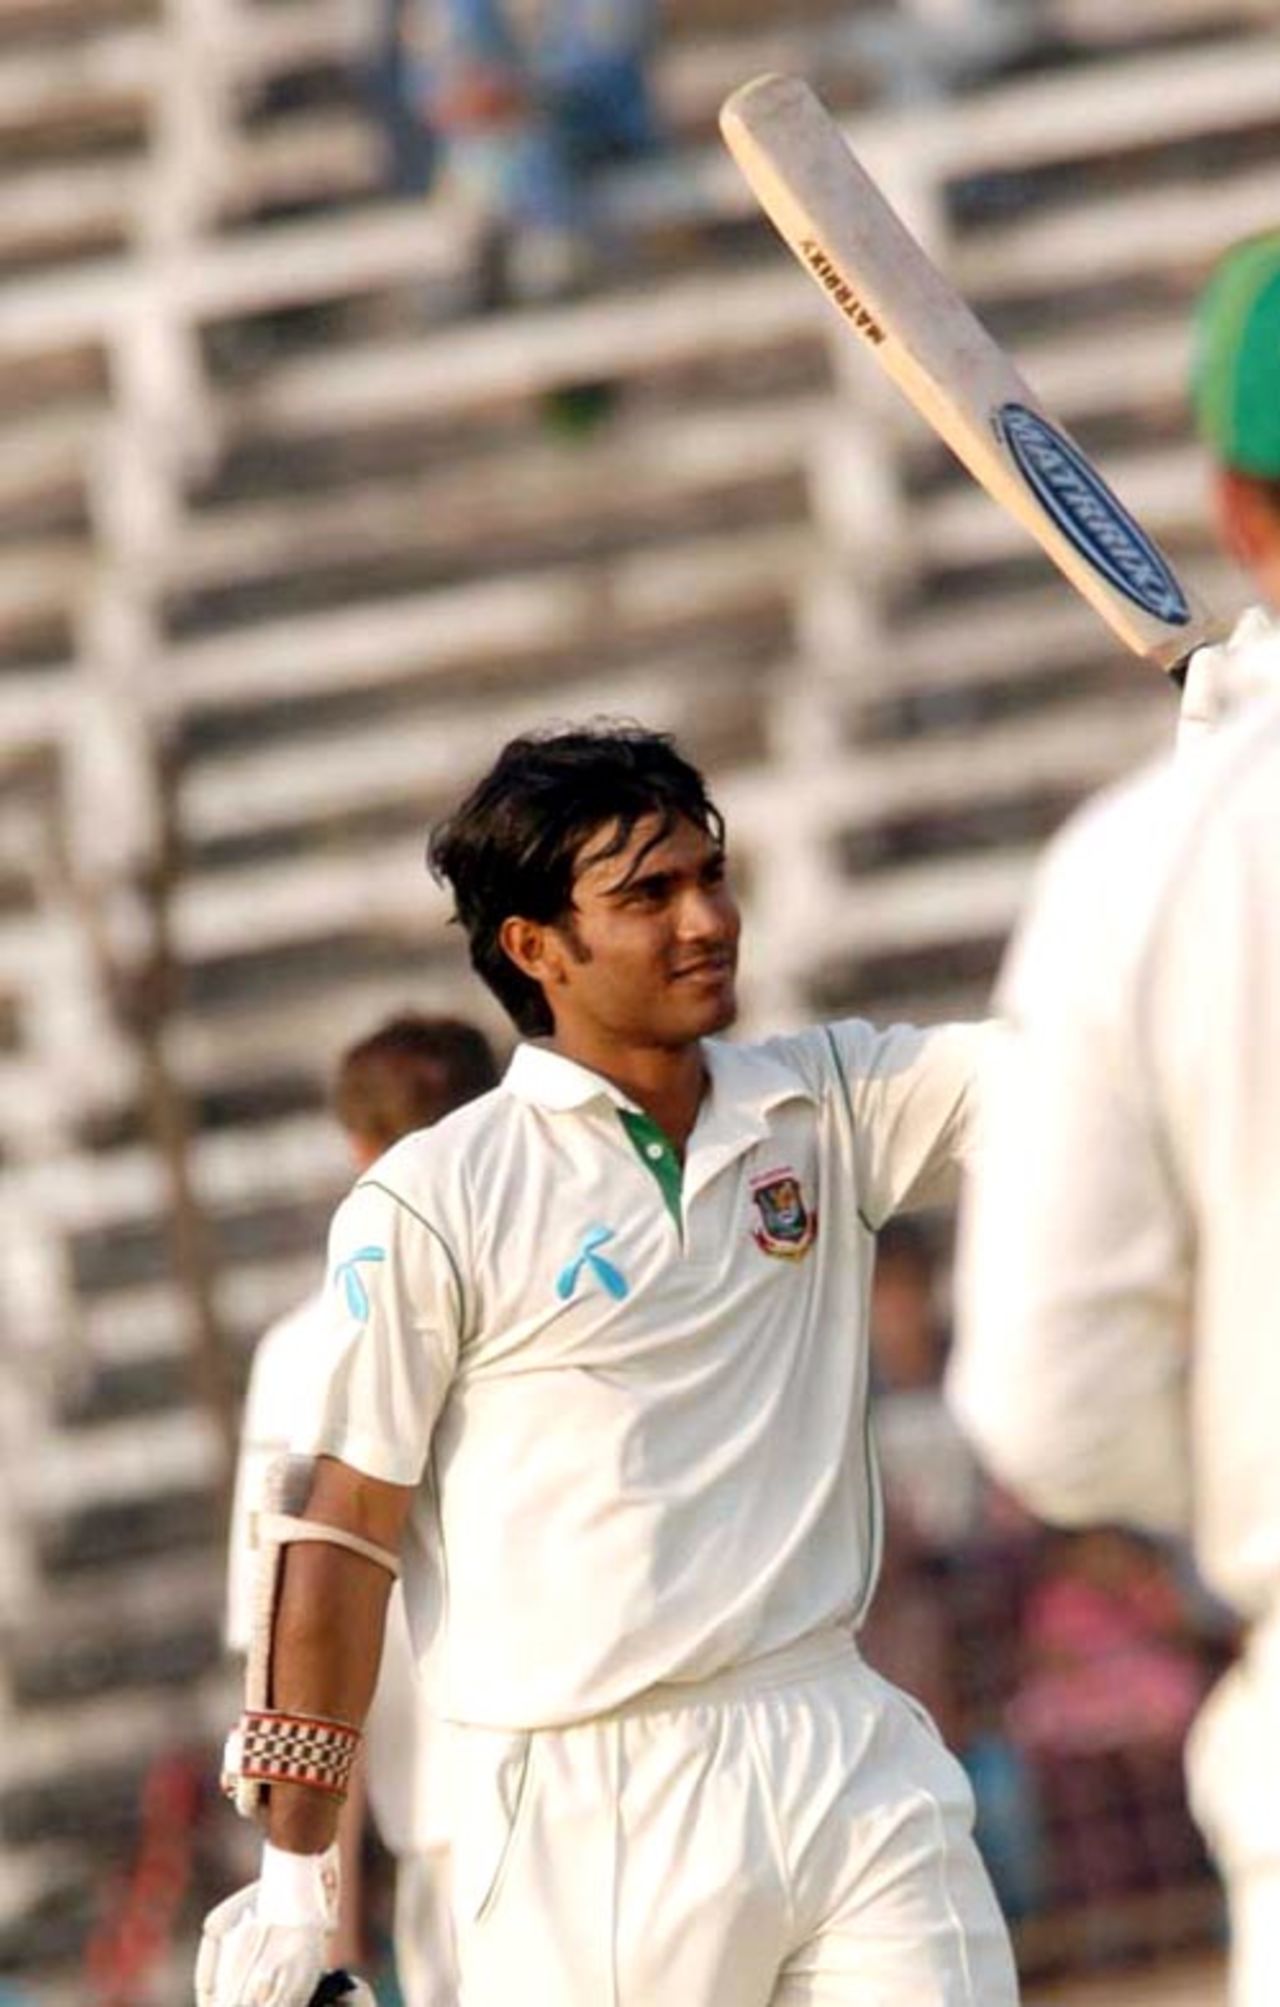 Junaid Siddique raises the bat after reaching his hundred, BCB XI v South Africans, 2nd day, Fatullah, February 18, 2008